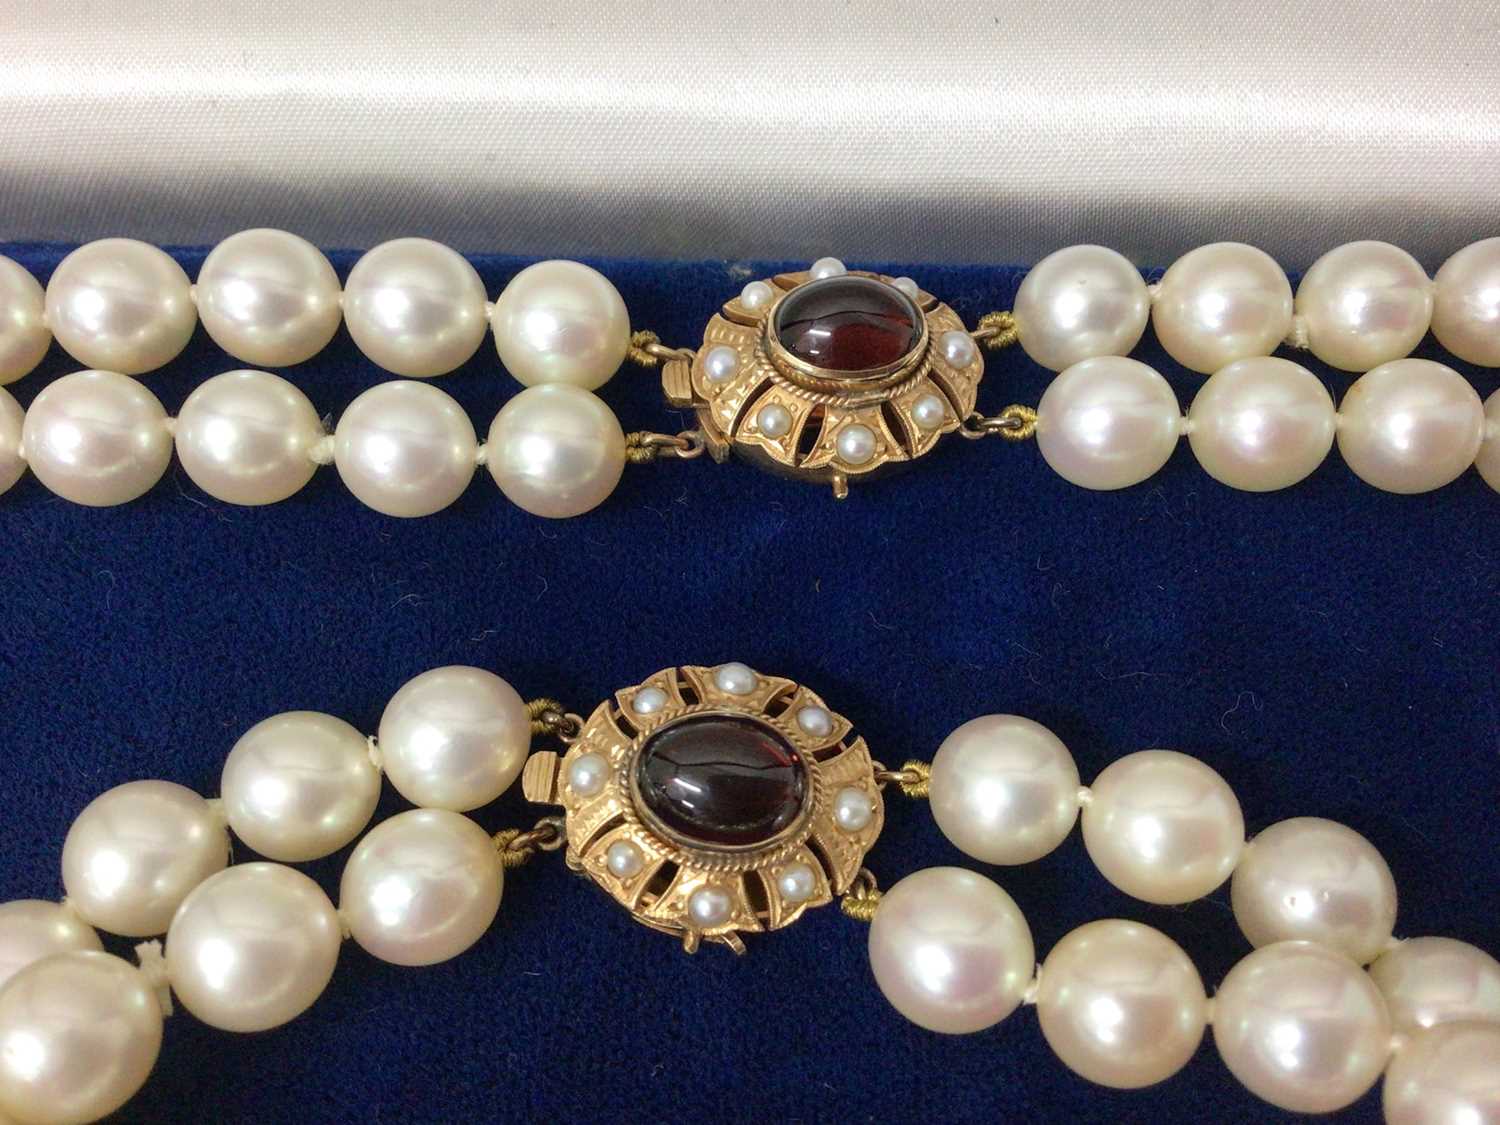 Cultured pearl two strand necklace and bracelet, each with two strings of 8mm cultured pearls on a g - Image 3 of 4